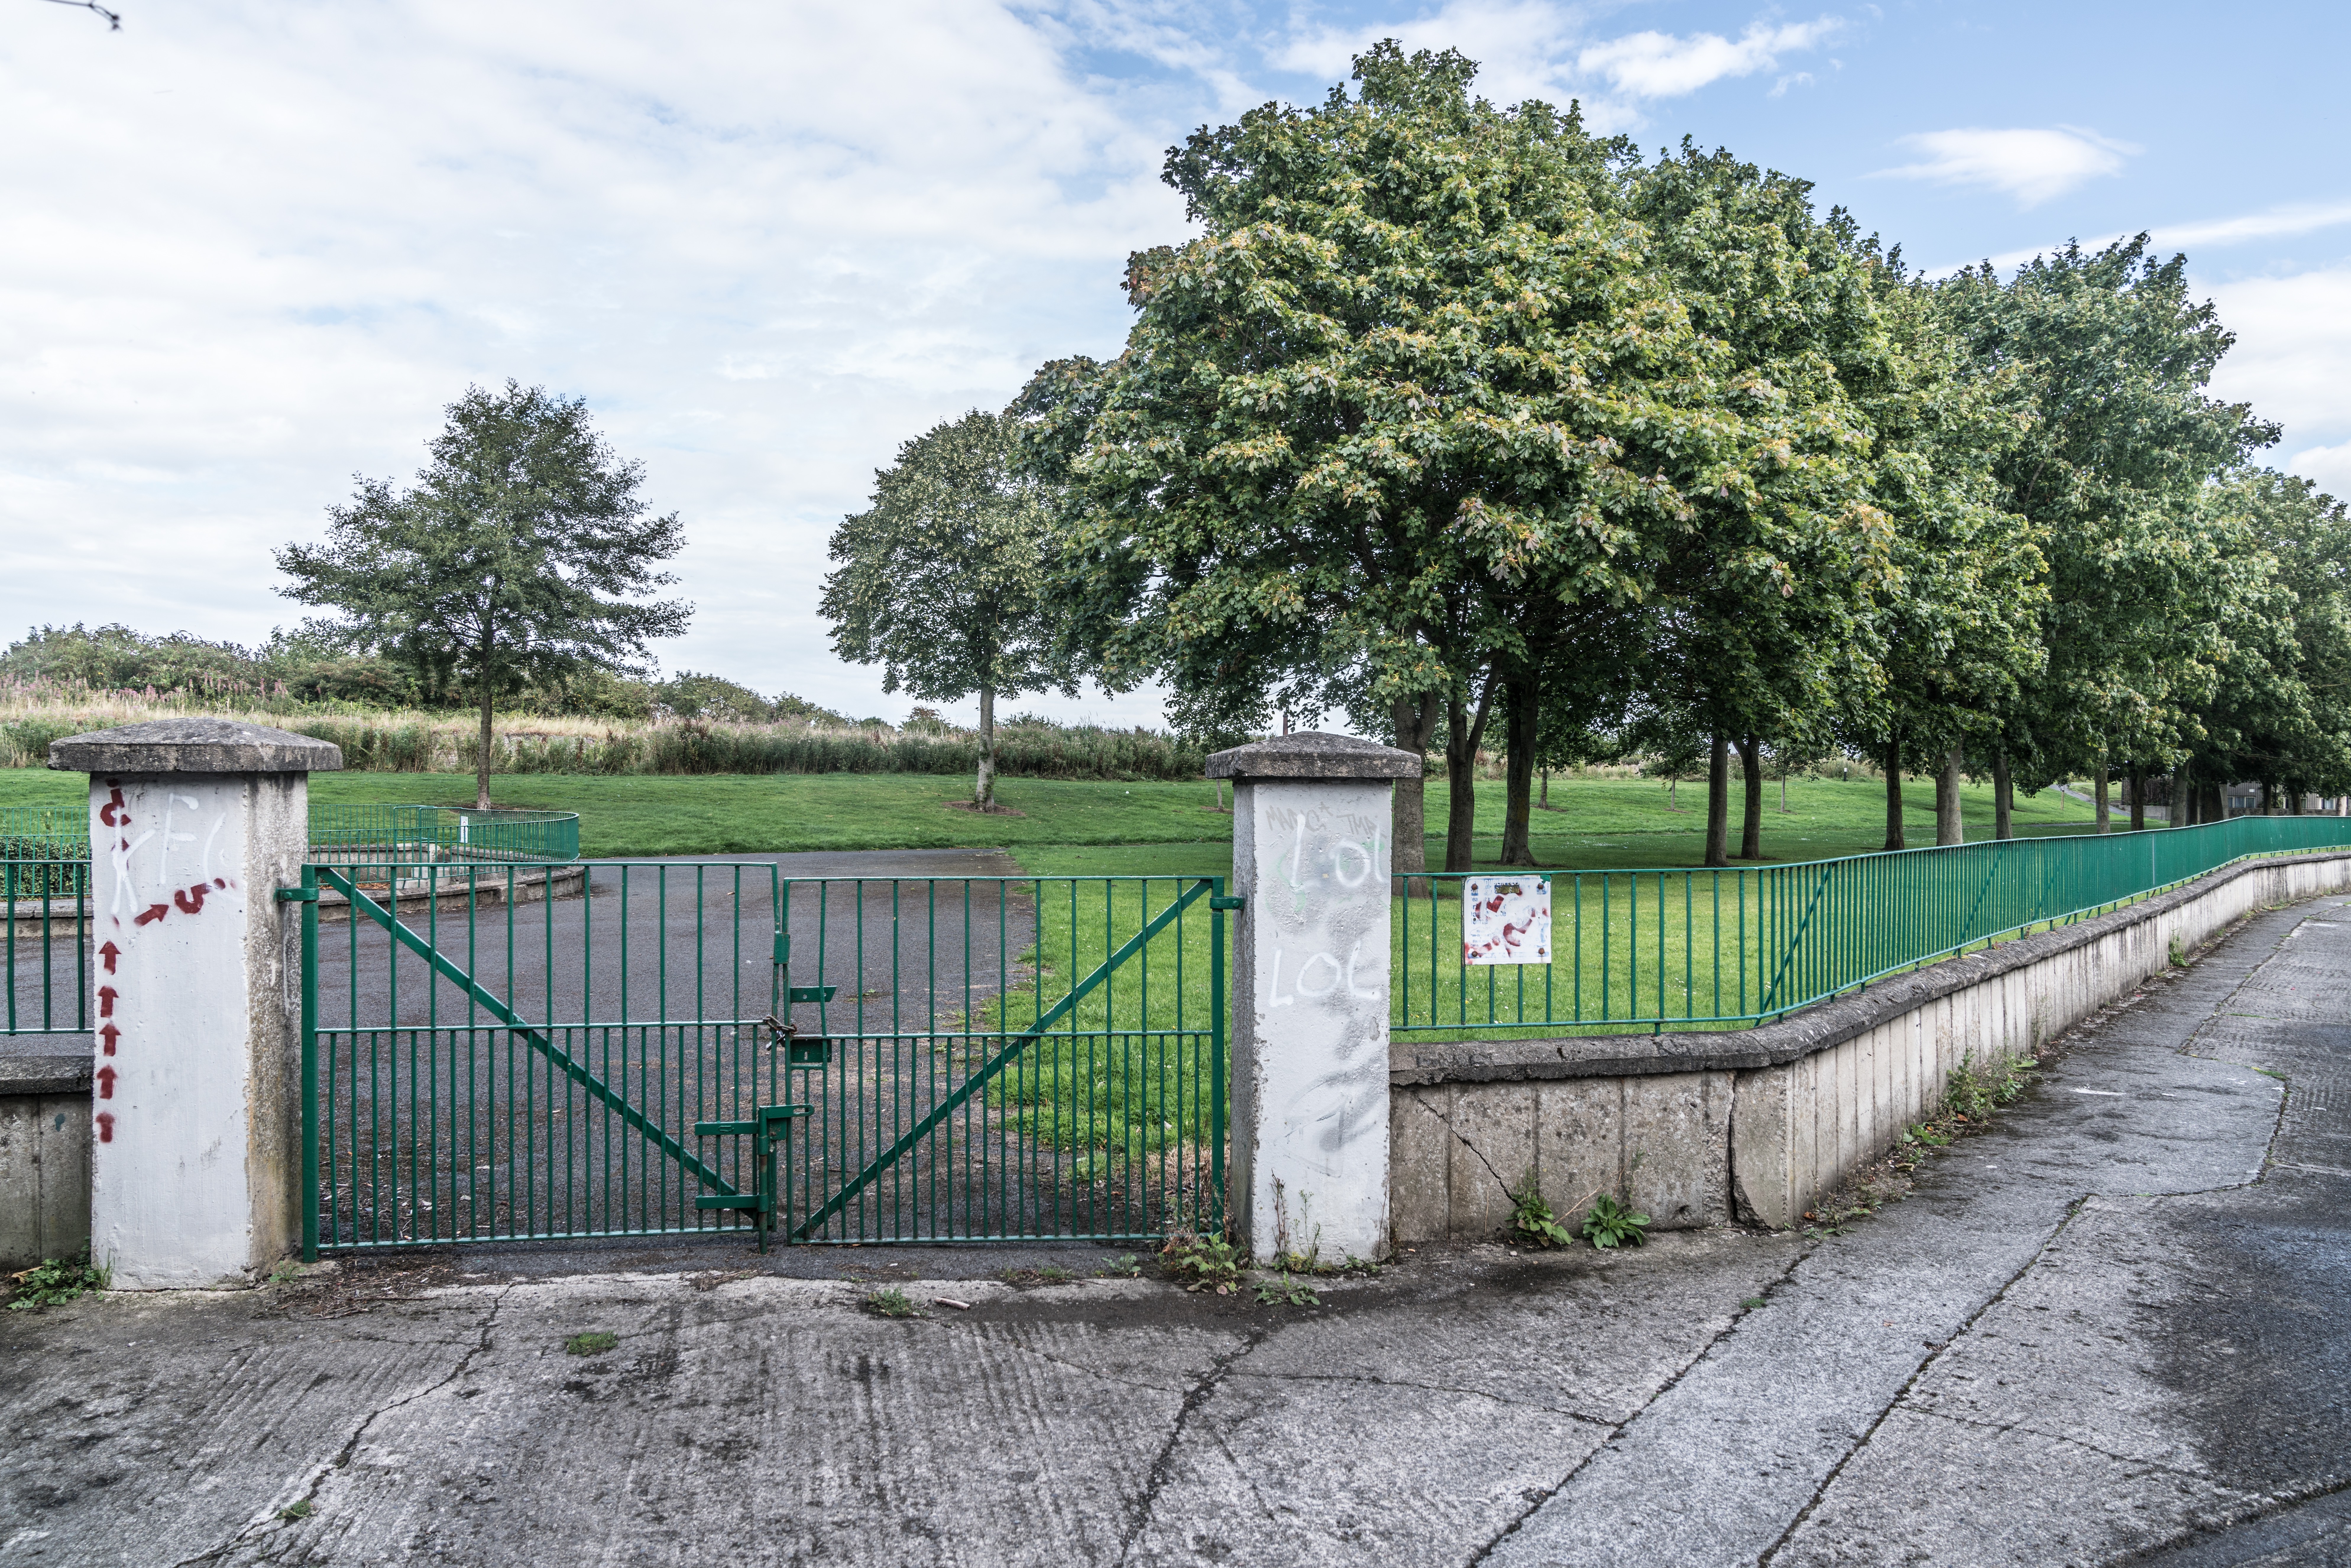  ROYAL CANAL - CABRA AREA 011 